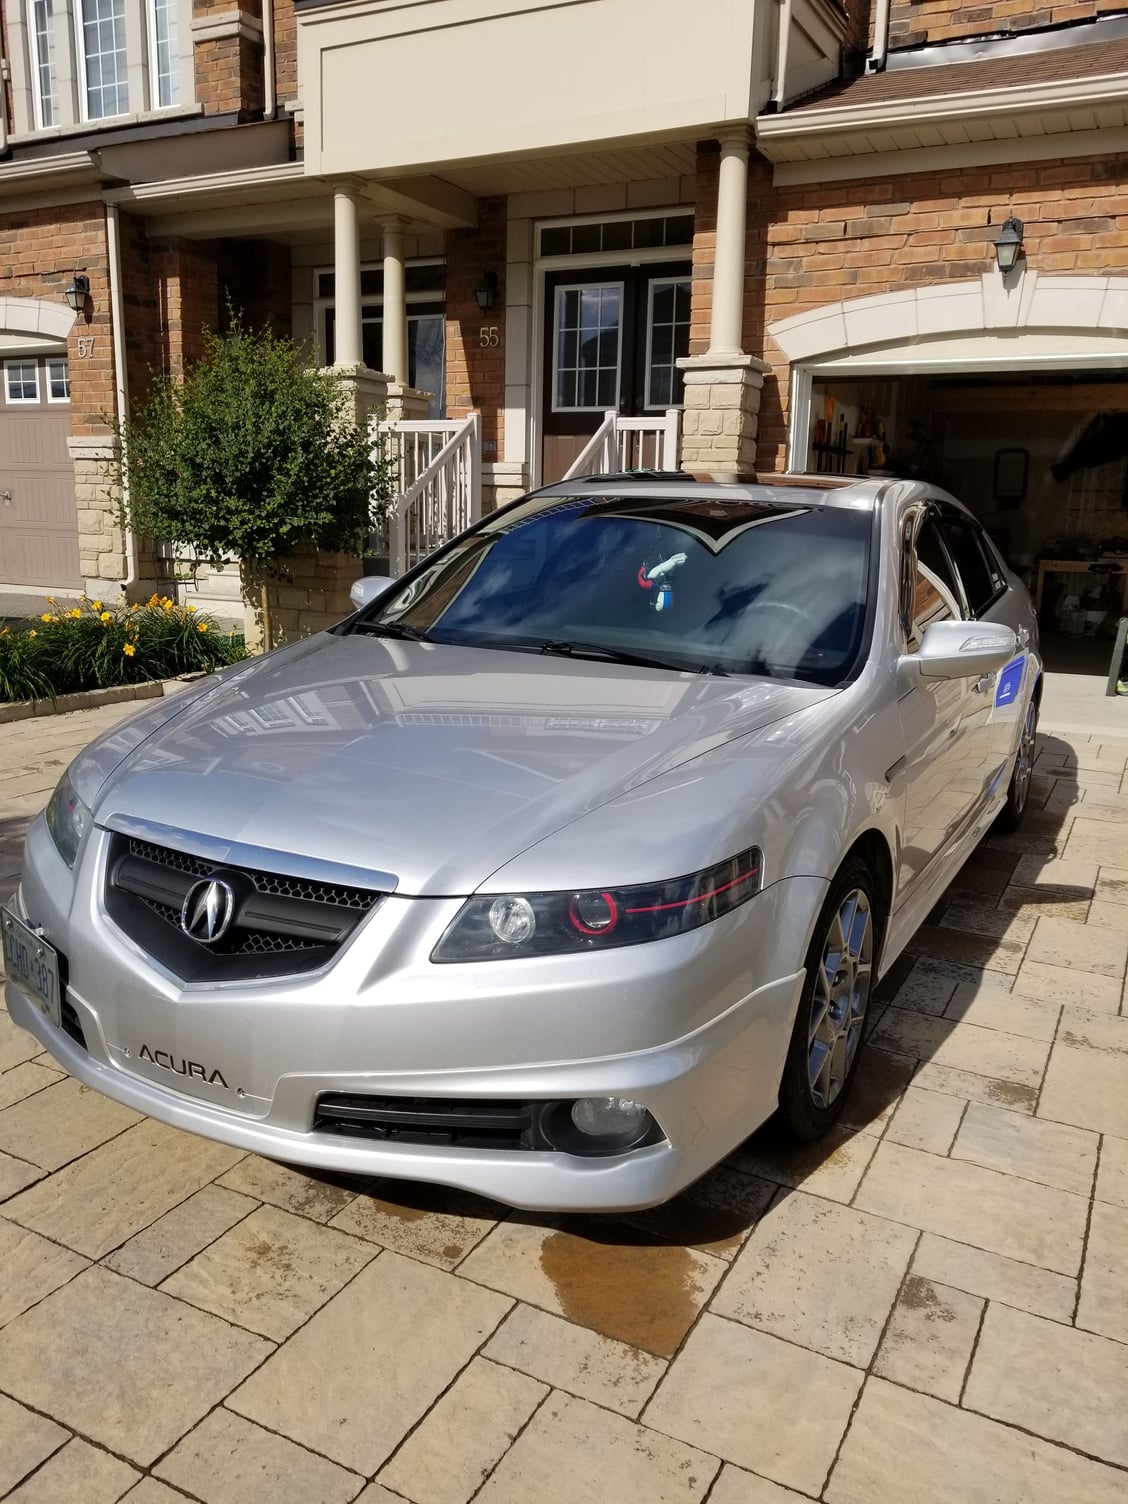 2008 Acura TL - EXPIRED: CLEAN 08 Acura TL Type S for sale!! Fully loaded! Must see!! - Used - VIN 19uua76588a802152 - 200 Miles - Automatic - Sedan - Silver - Vaughan, ON L6A, Canada